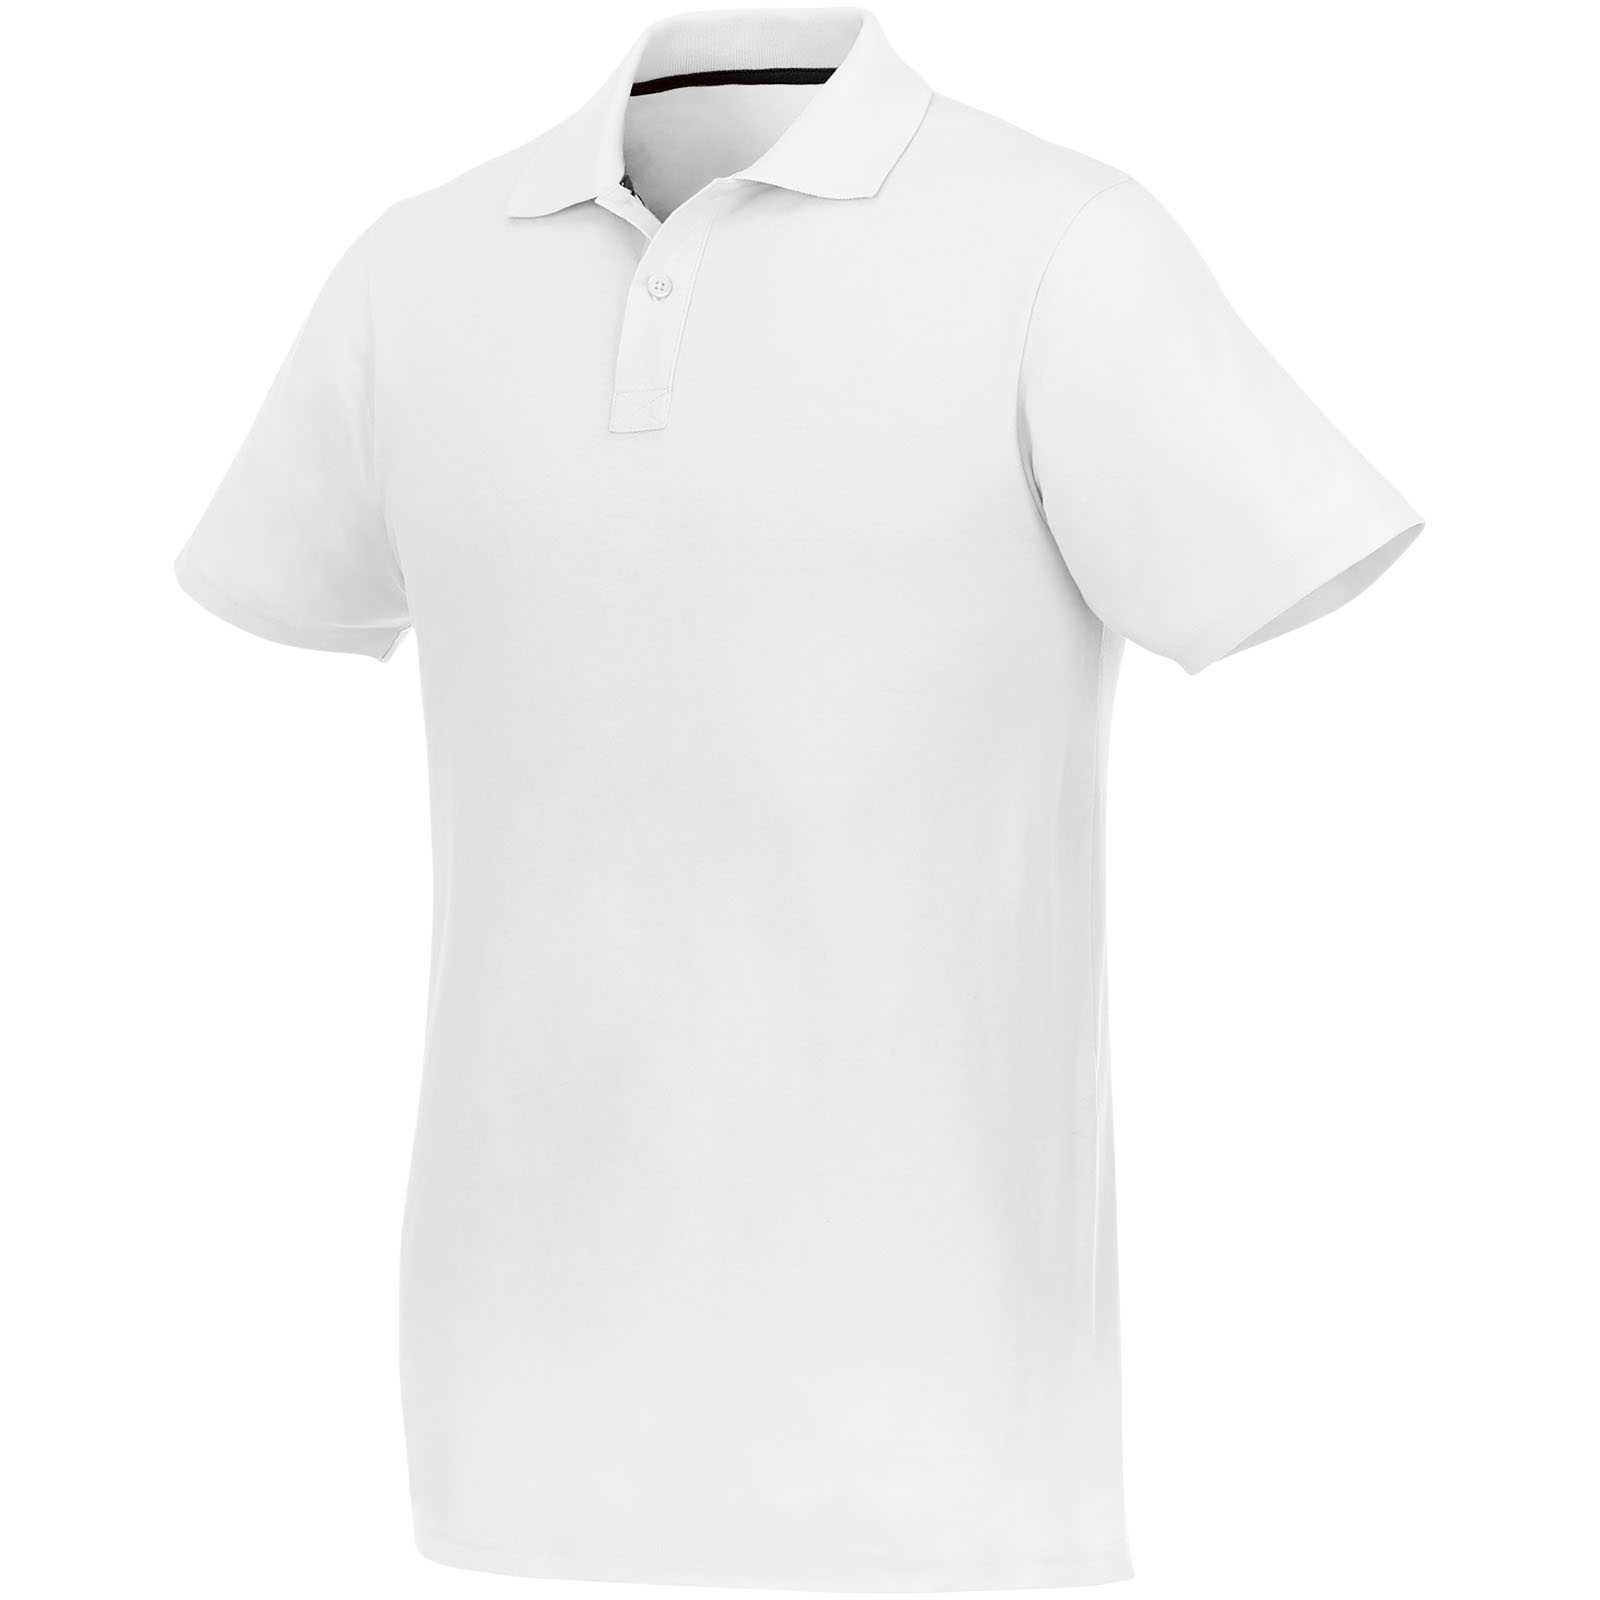 Men's Polo with a Refined Style - Tunstall - Banchory